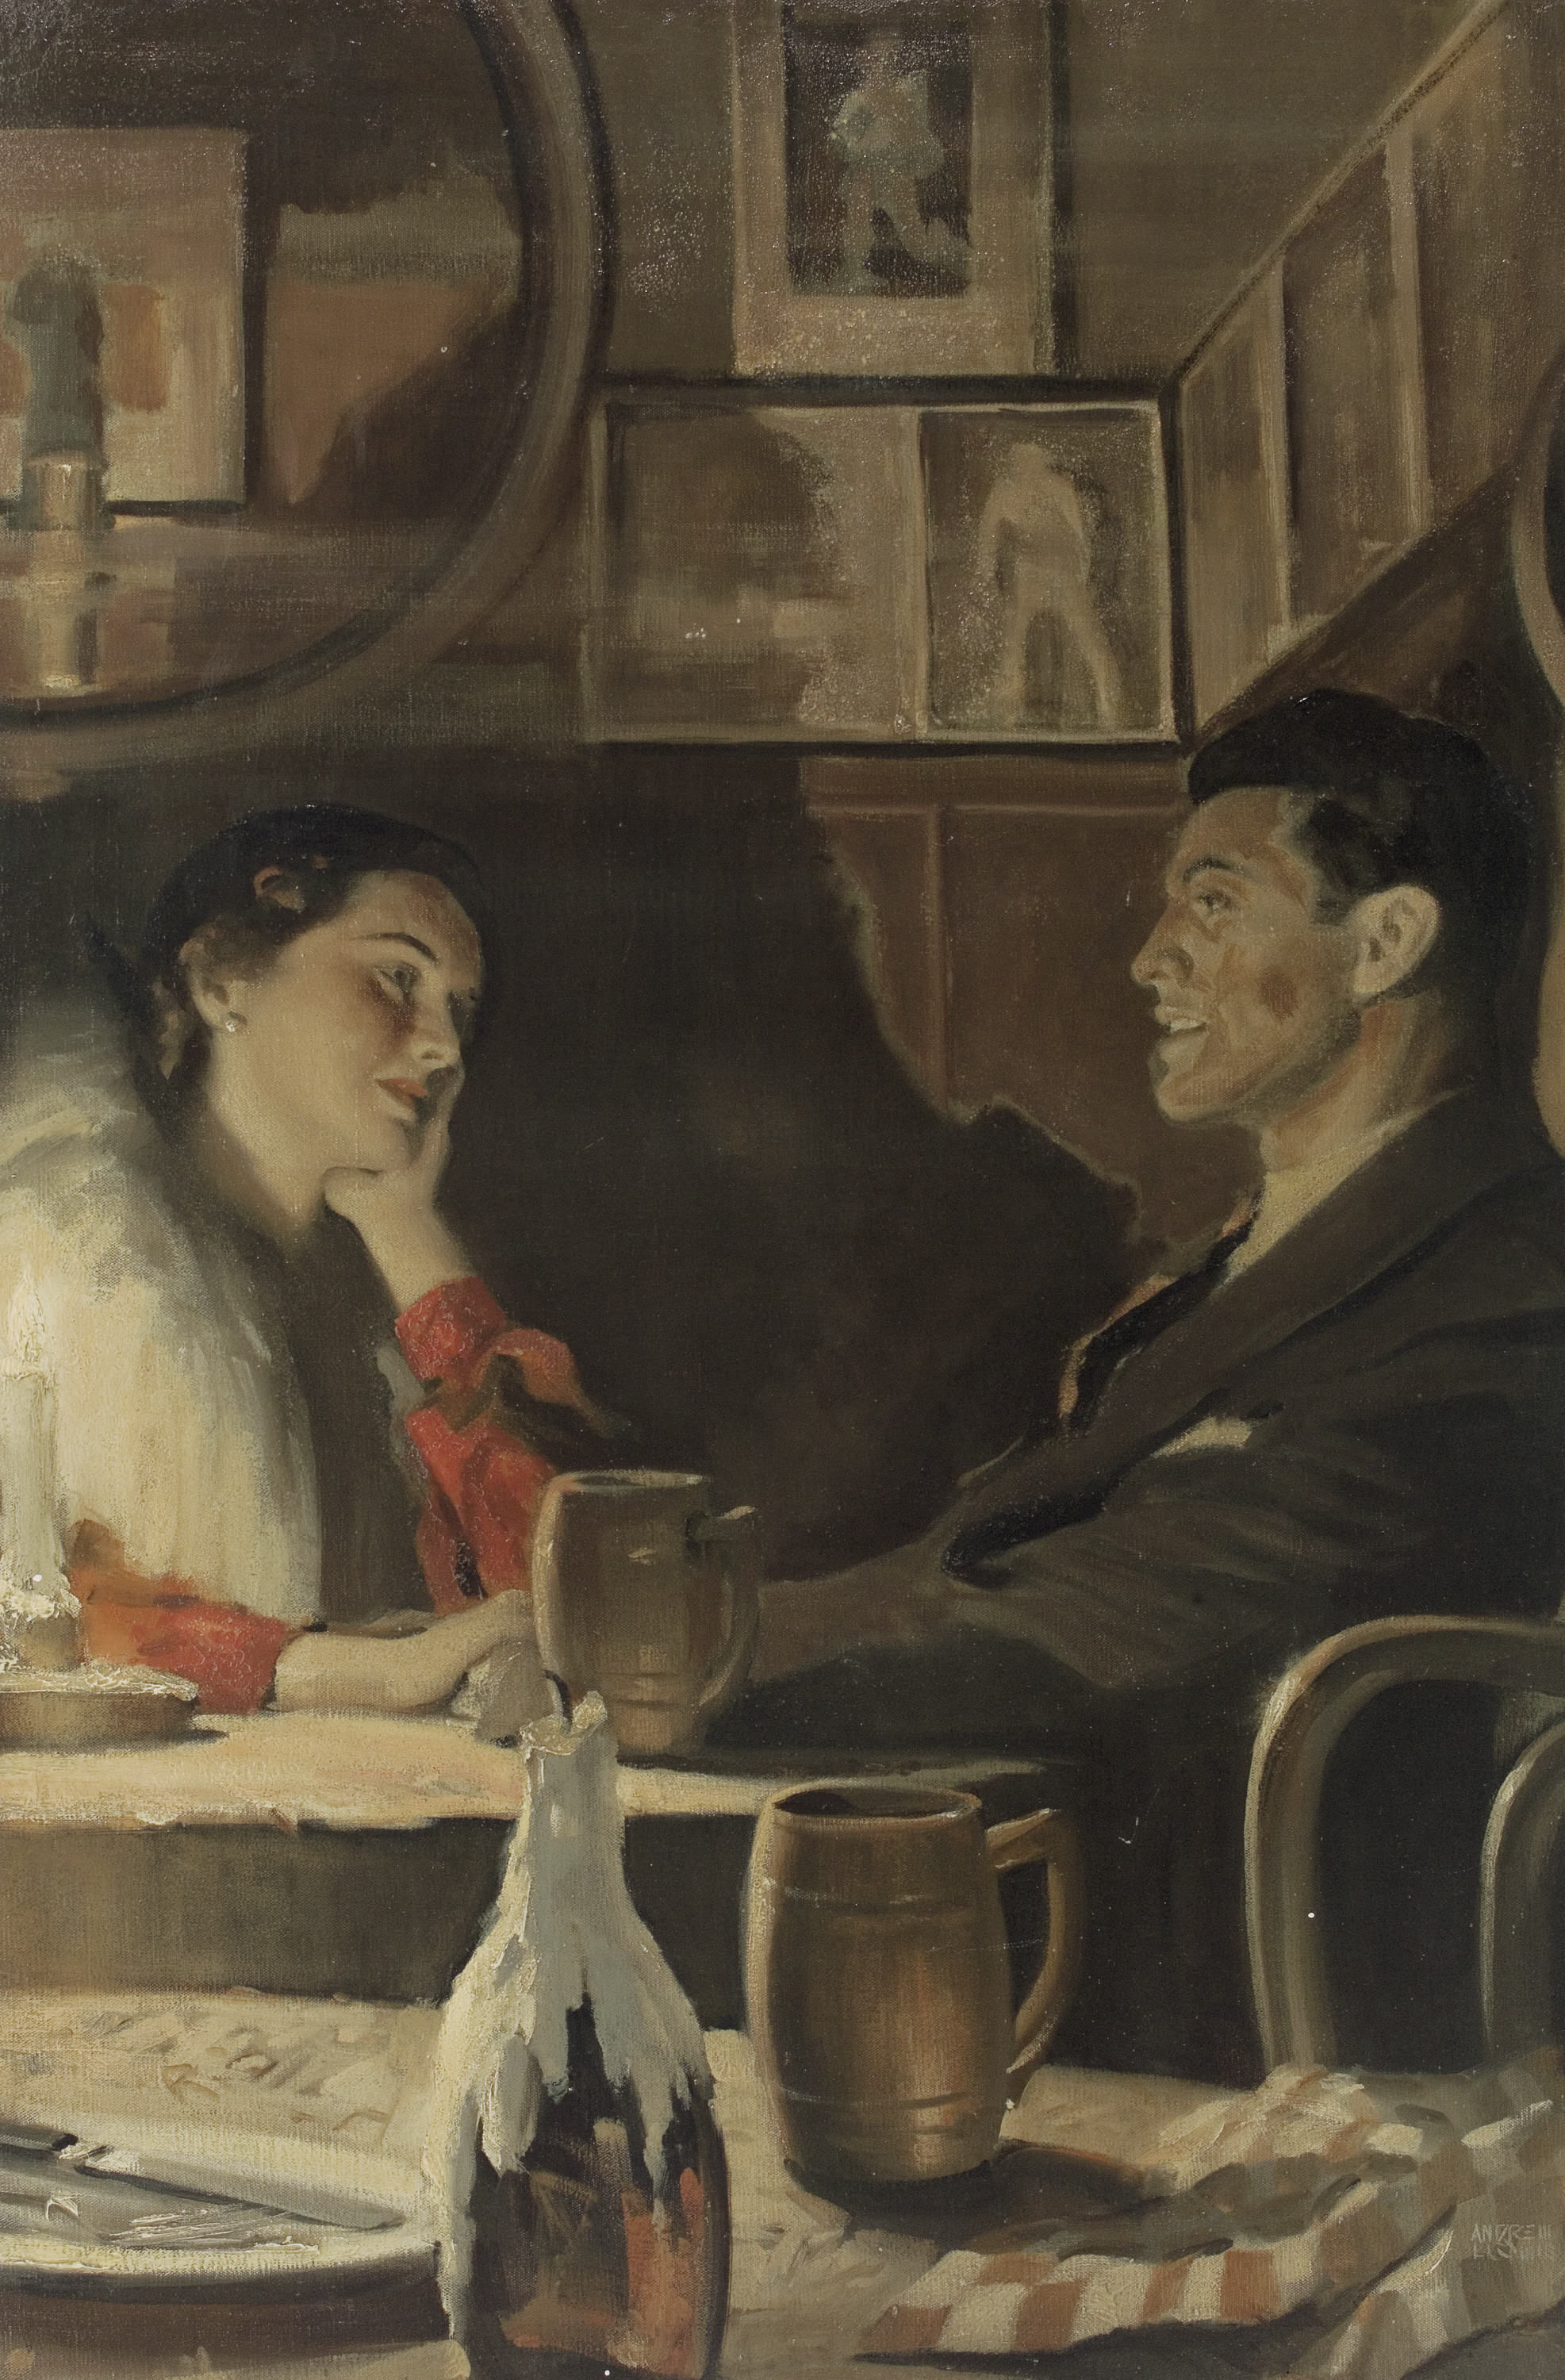 Table For Two by Andrew Loomis